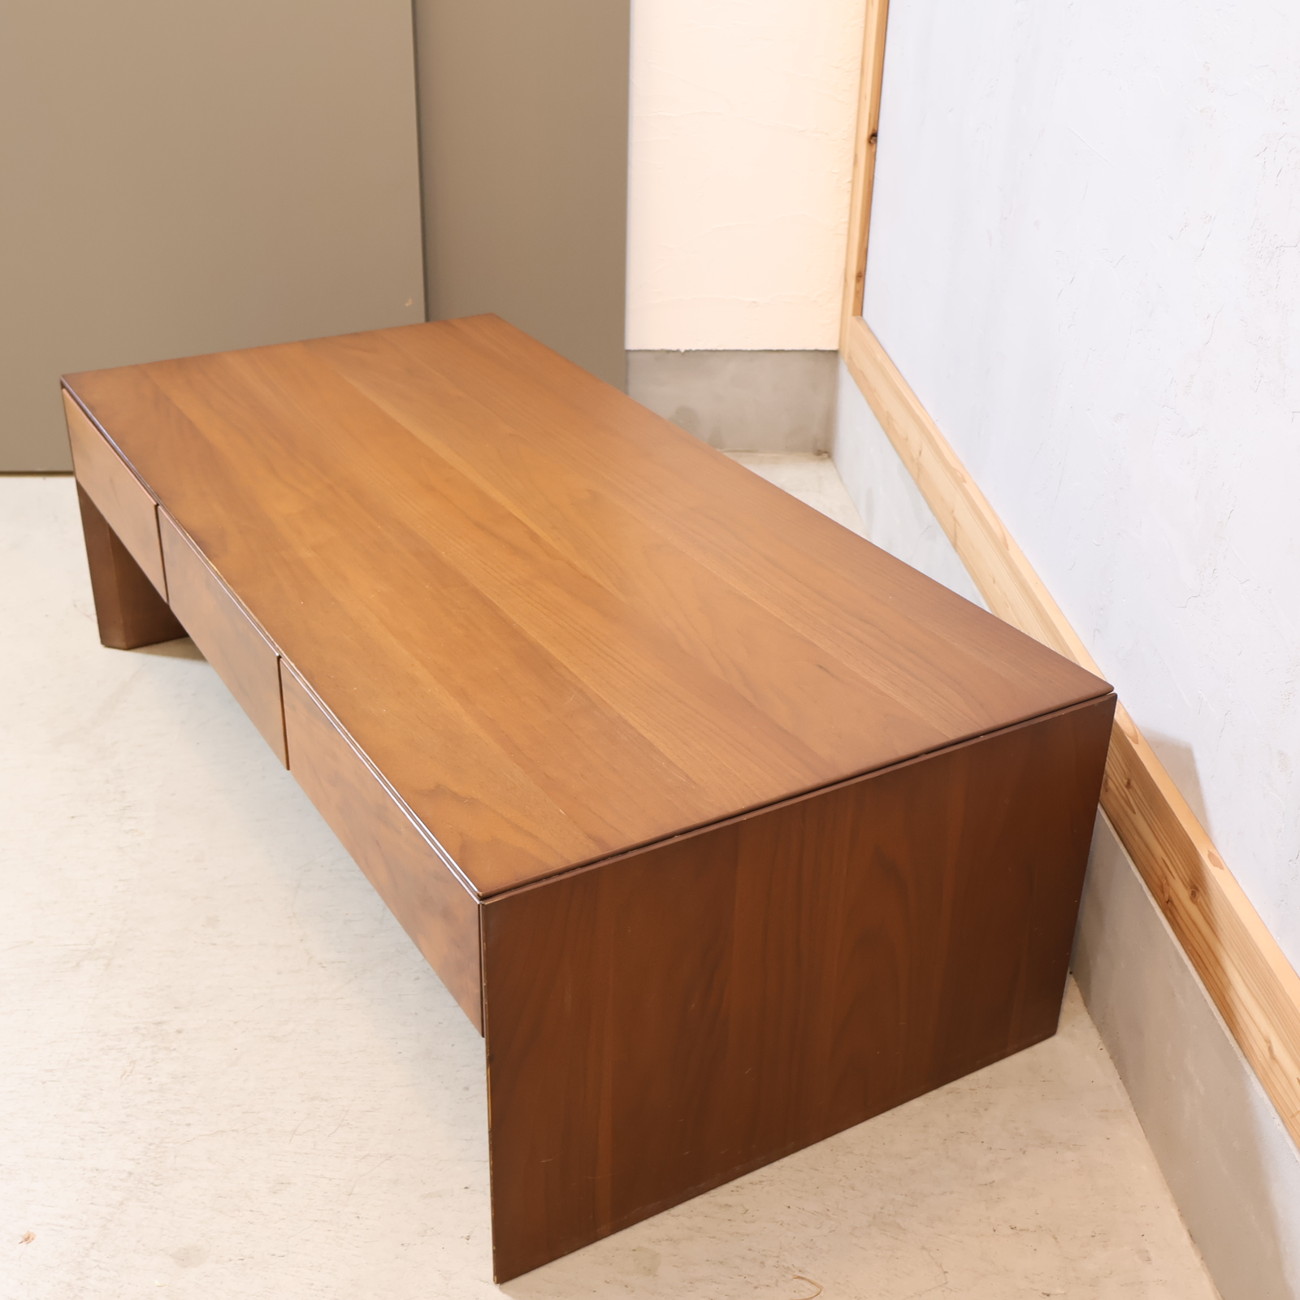 NAGANO INTERIORnagano interior walnut material center table low table drawer attaching Northern Europe style natural modern EC330